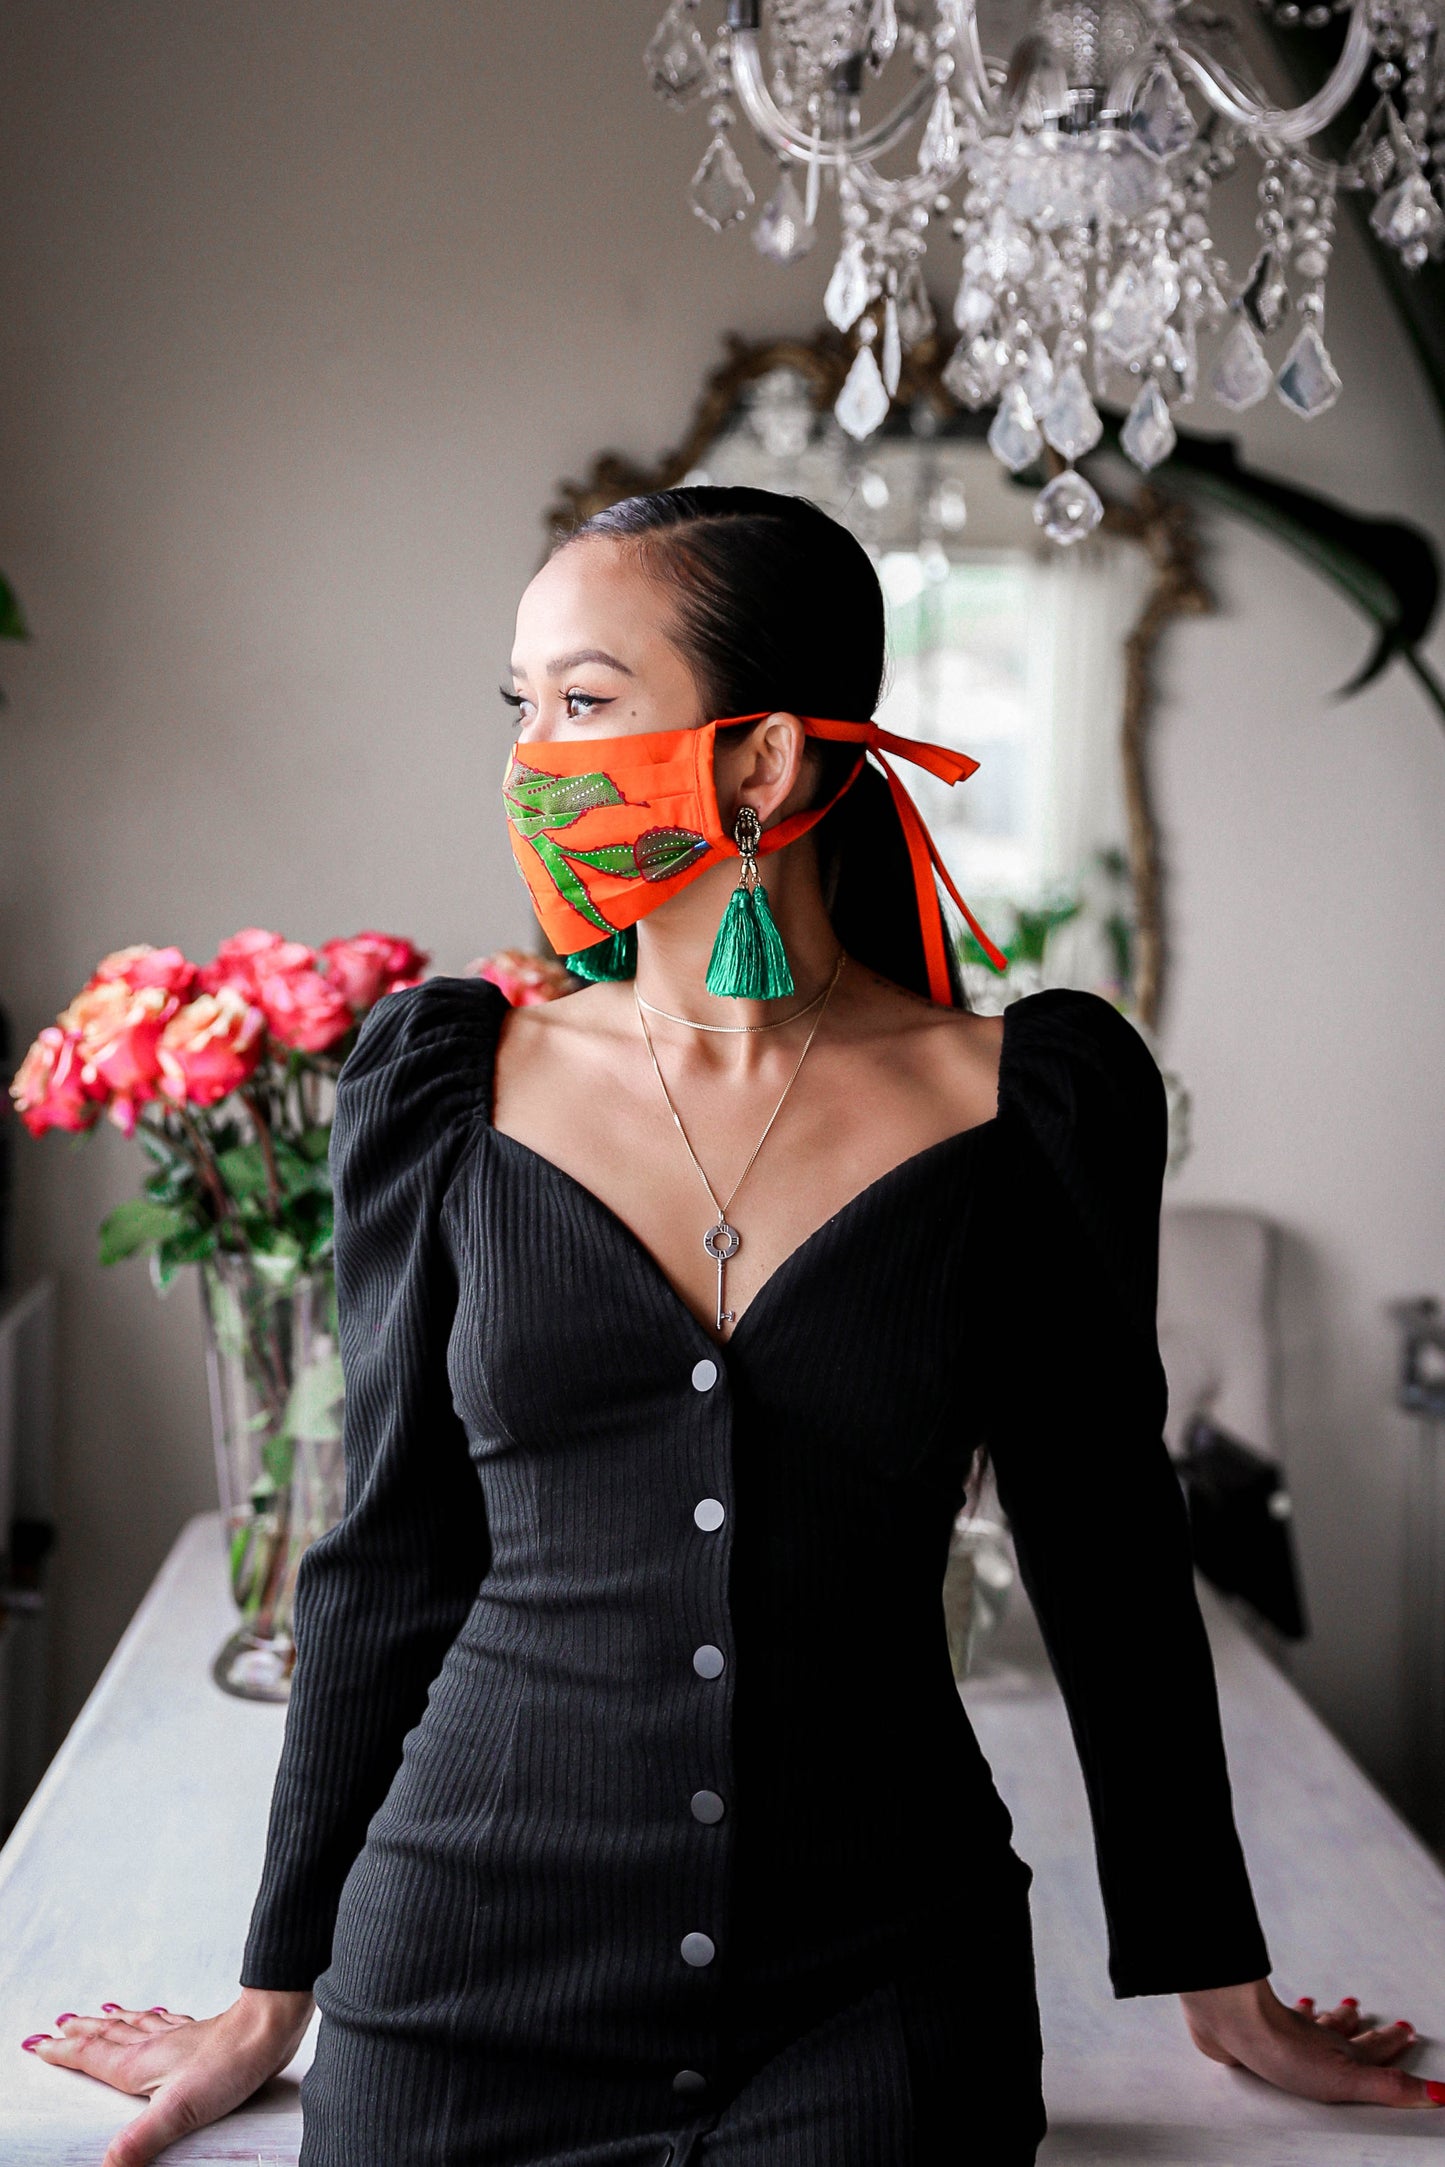 Floral Face Mask with String Ties - ALL PROCEEDS WILL GO TO MEALS ON WHEELS AMERICA